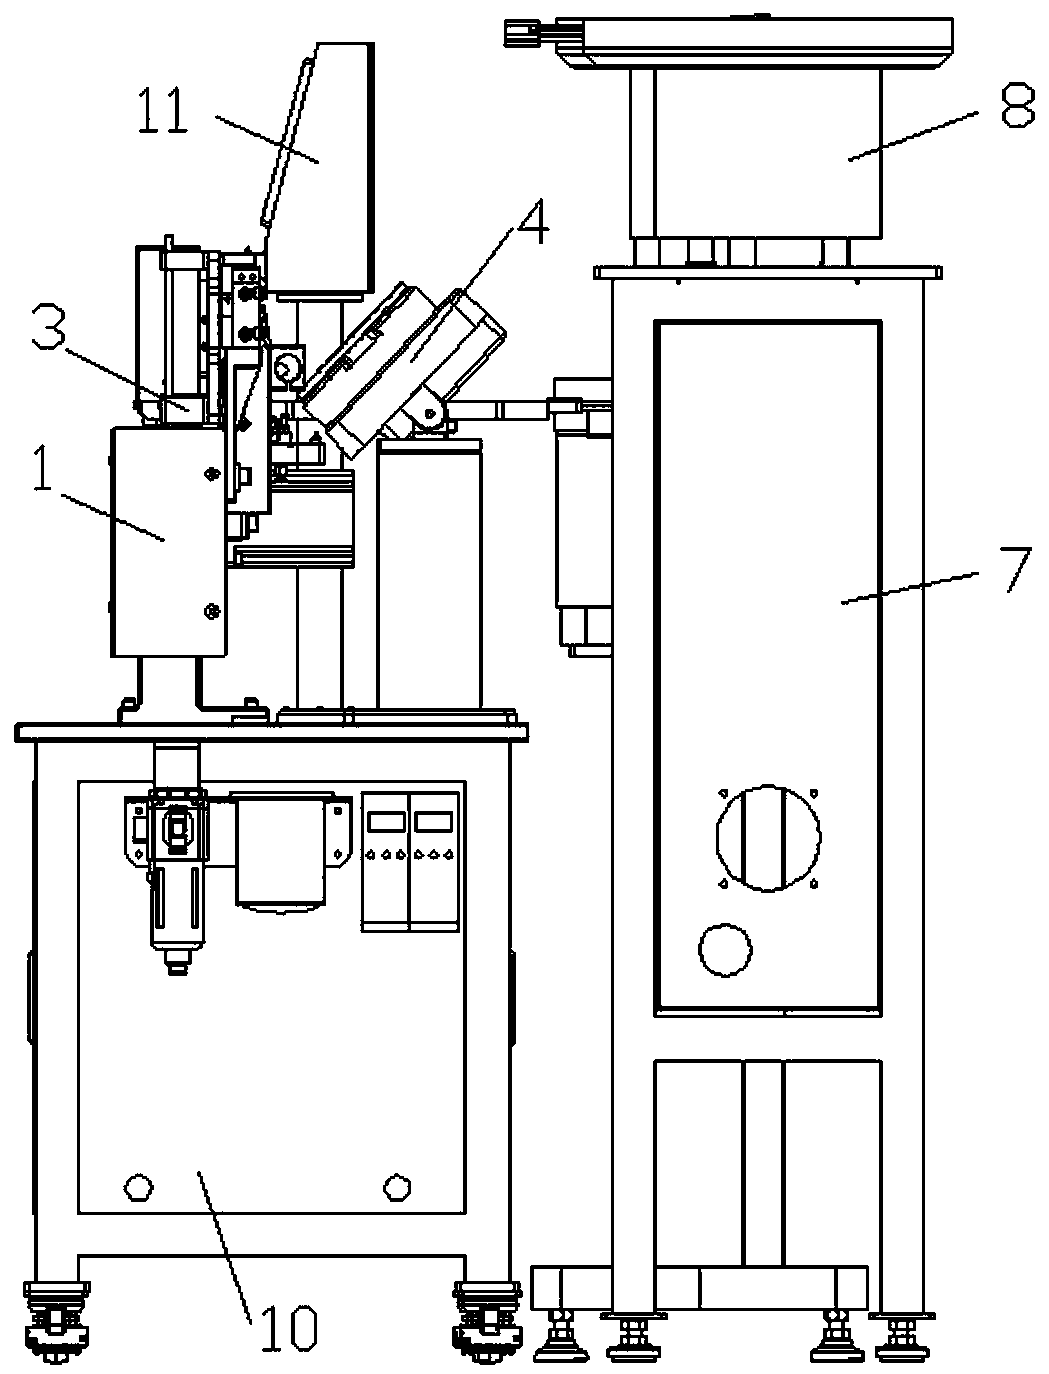 A vacuum electronic counting and filling equipment